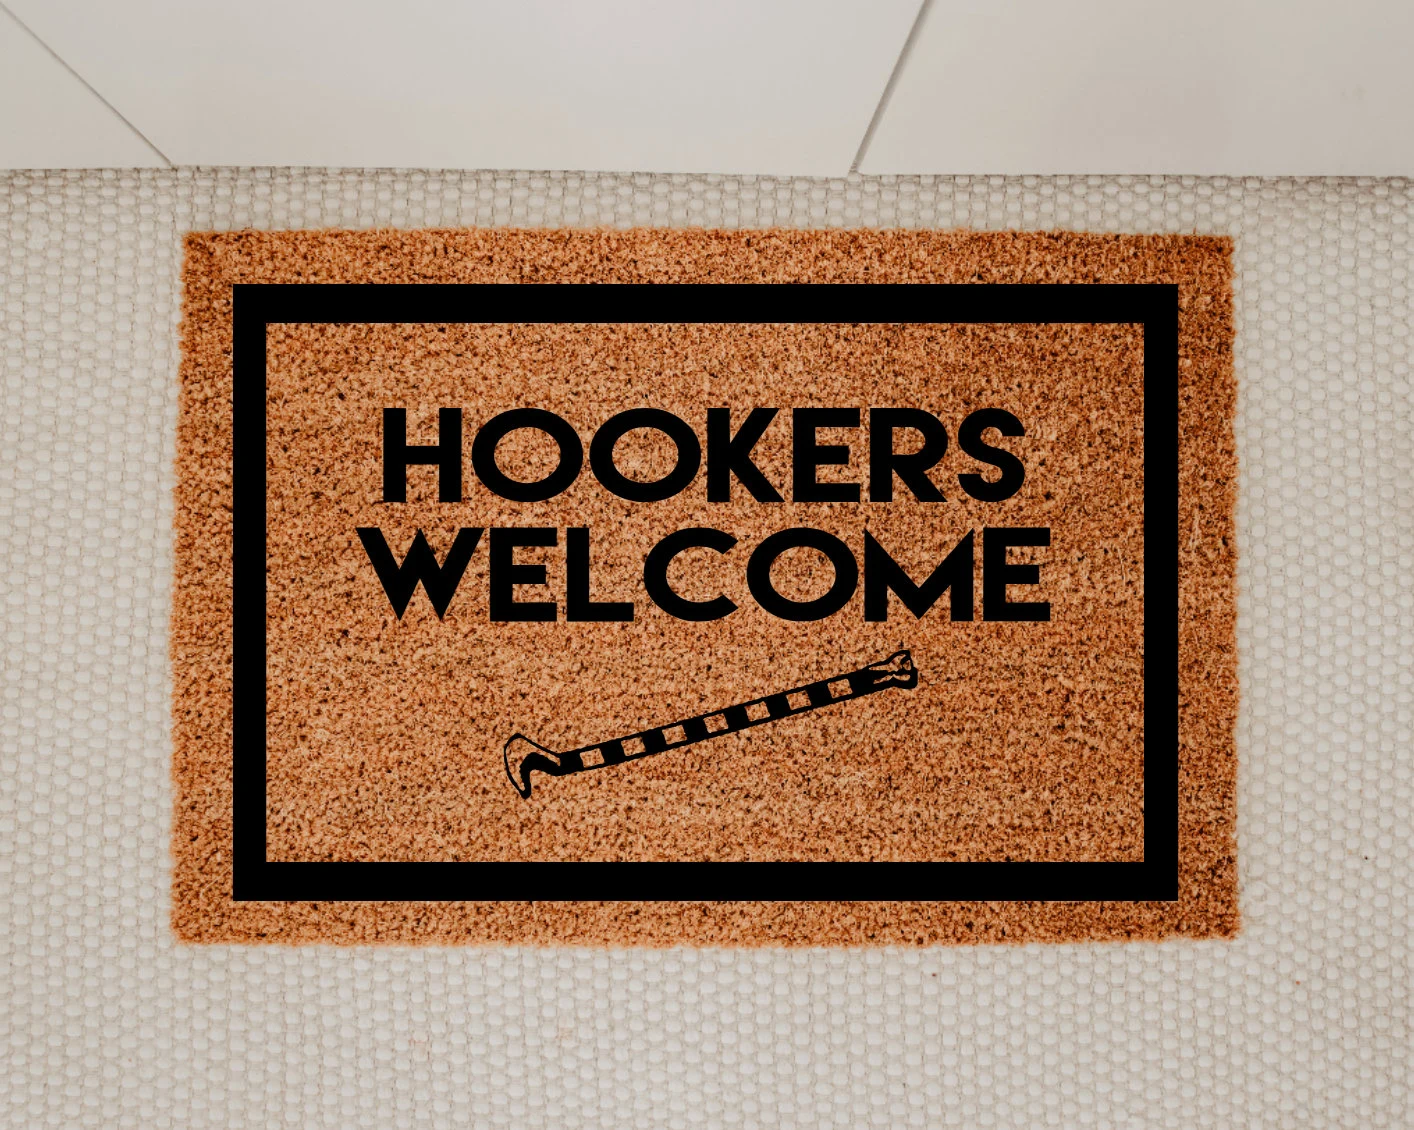 Entire design black. Centered block letters read hookers welcome. One word above the other. Below text and centered is image of tail hook from navy aircraft. Border 1.5 inch thick all the way around edge of mat. Mat is brown coconut husk.